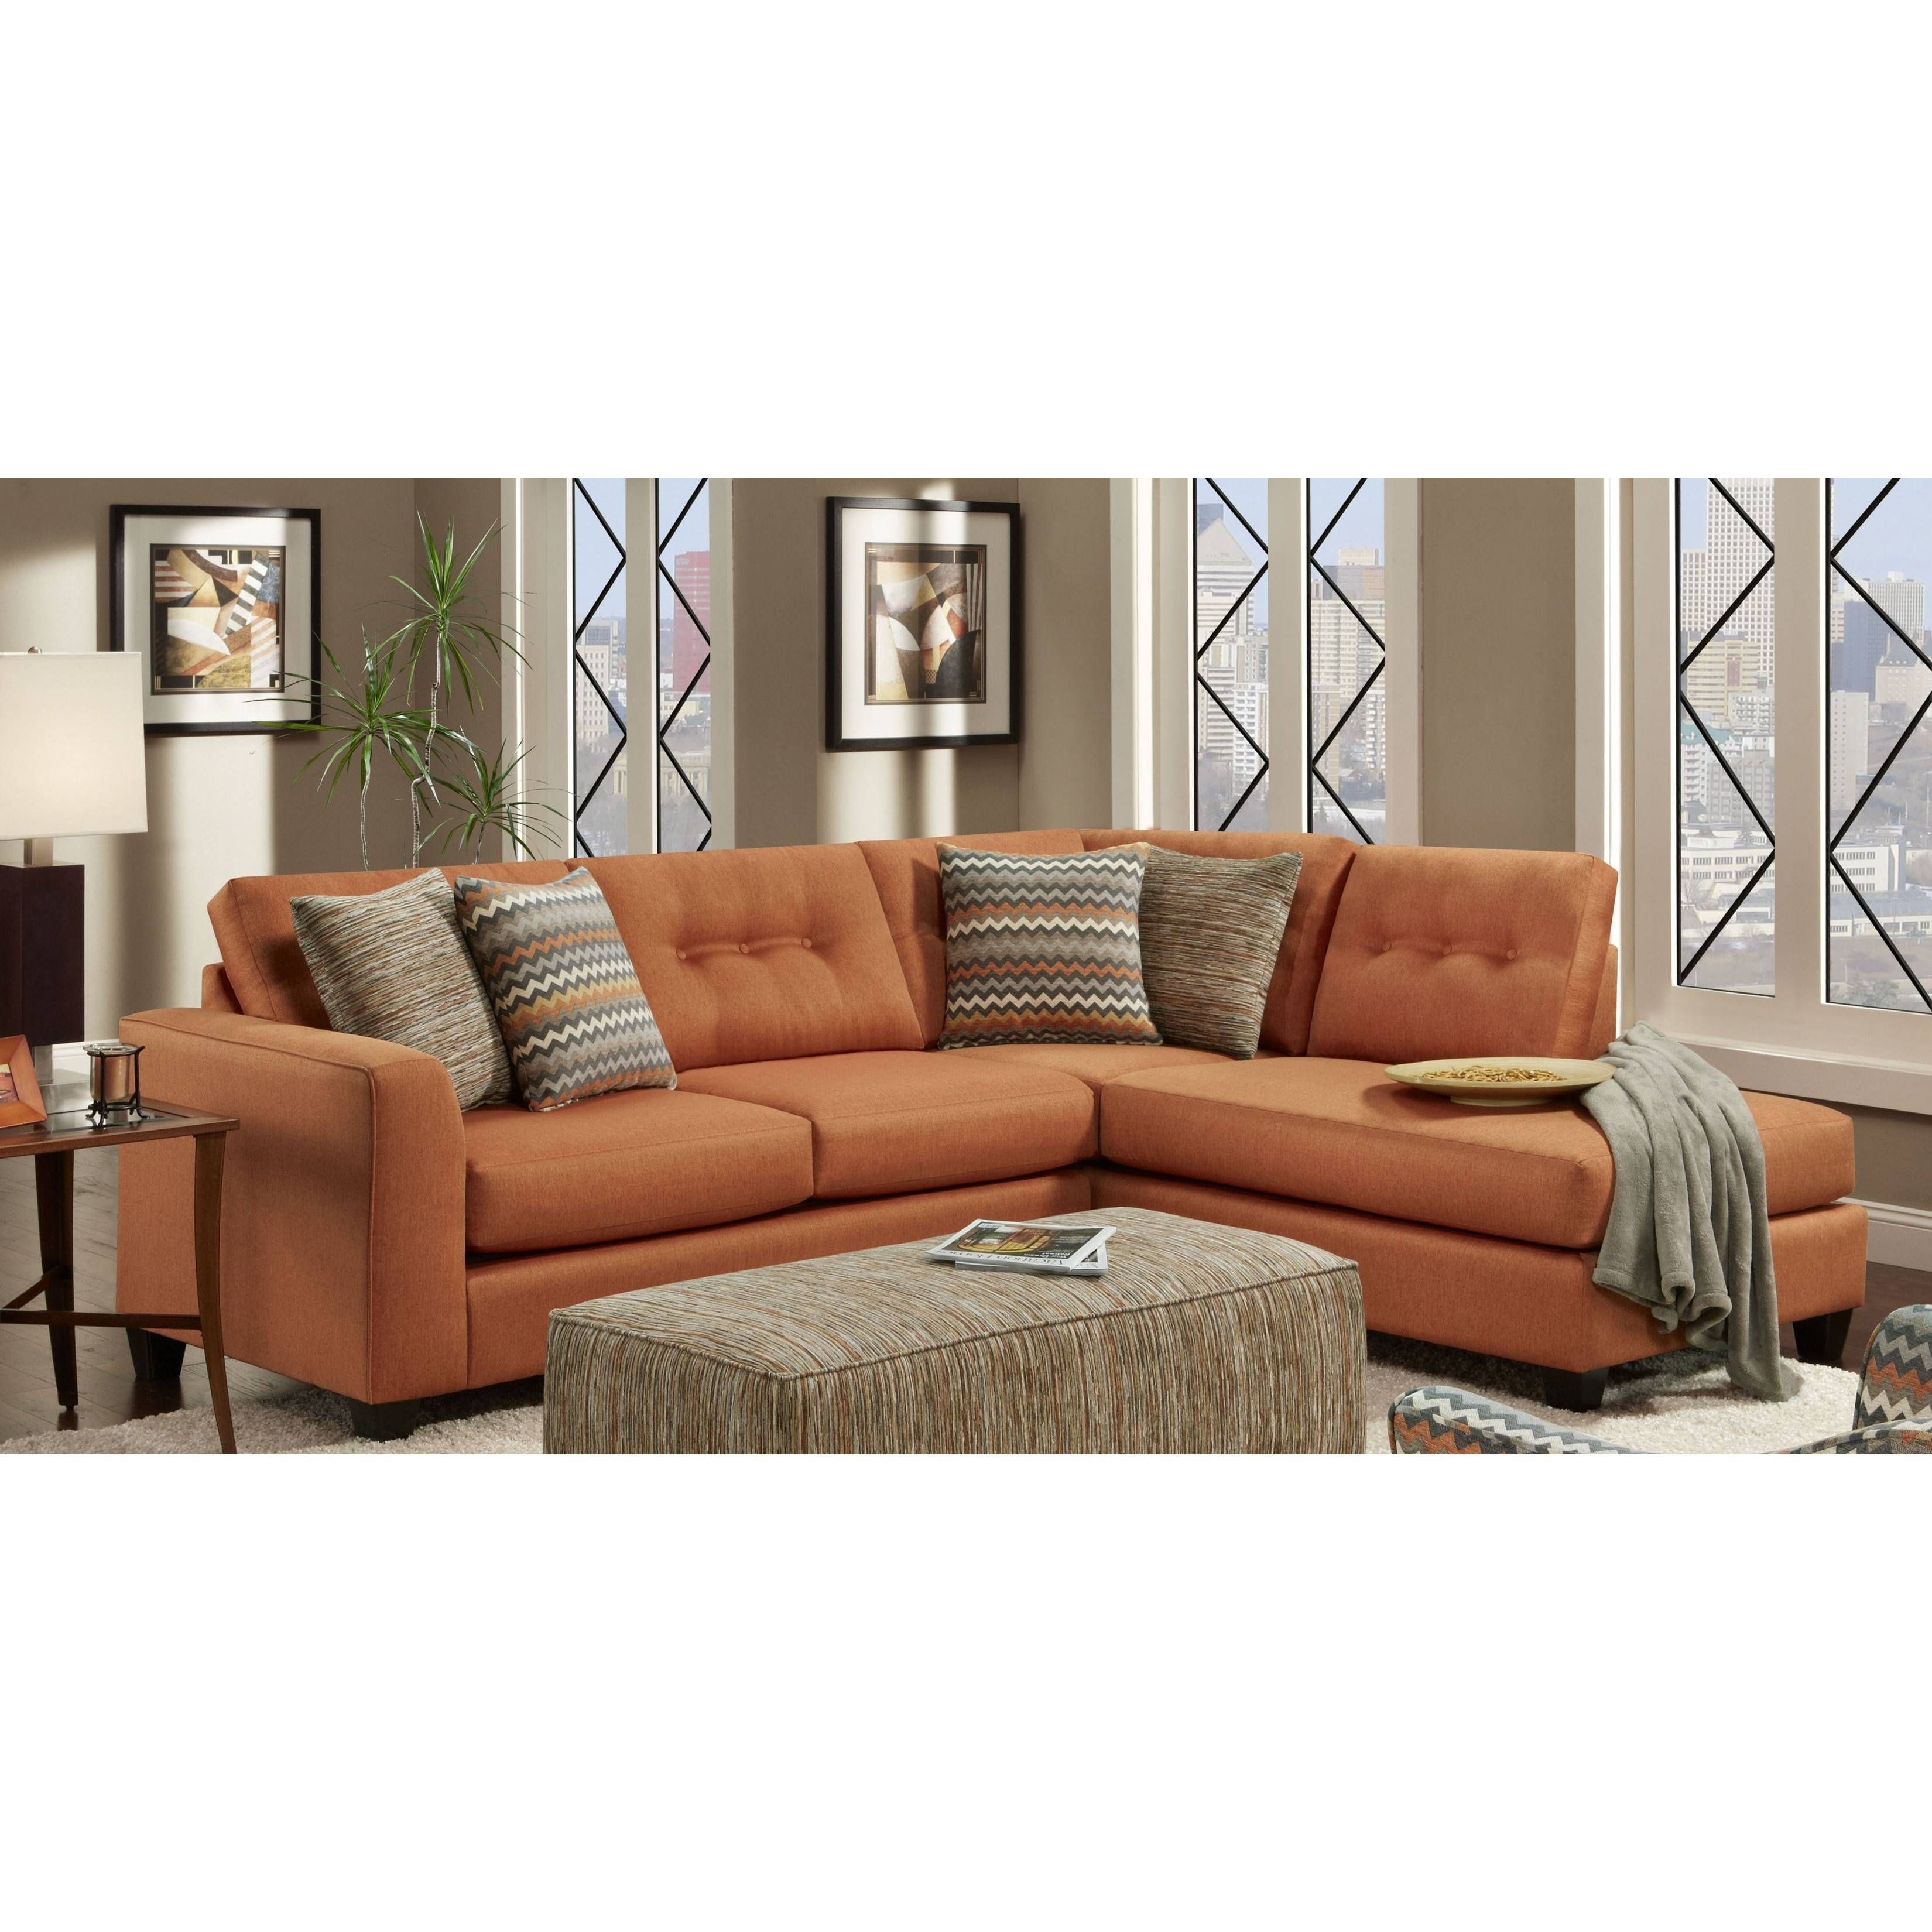 Sofa Trend Sectional – Hotelsbacau For Wide Seat Sectional Sofas (View 23 of 25)